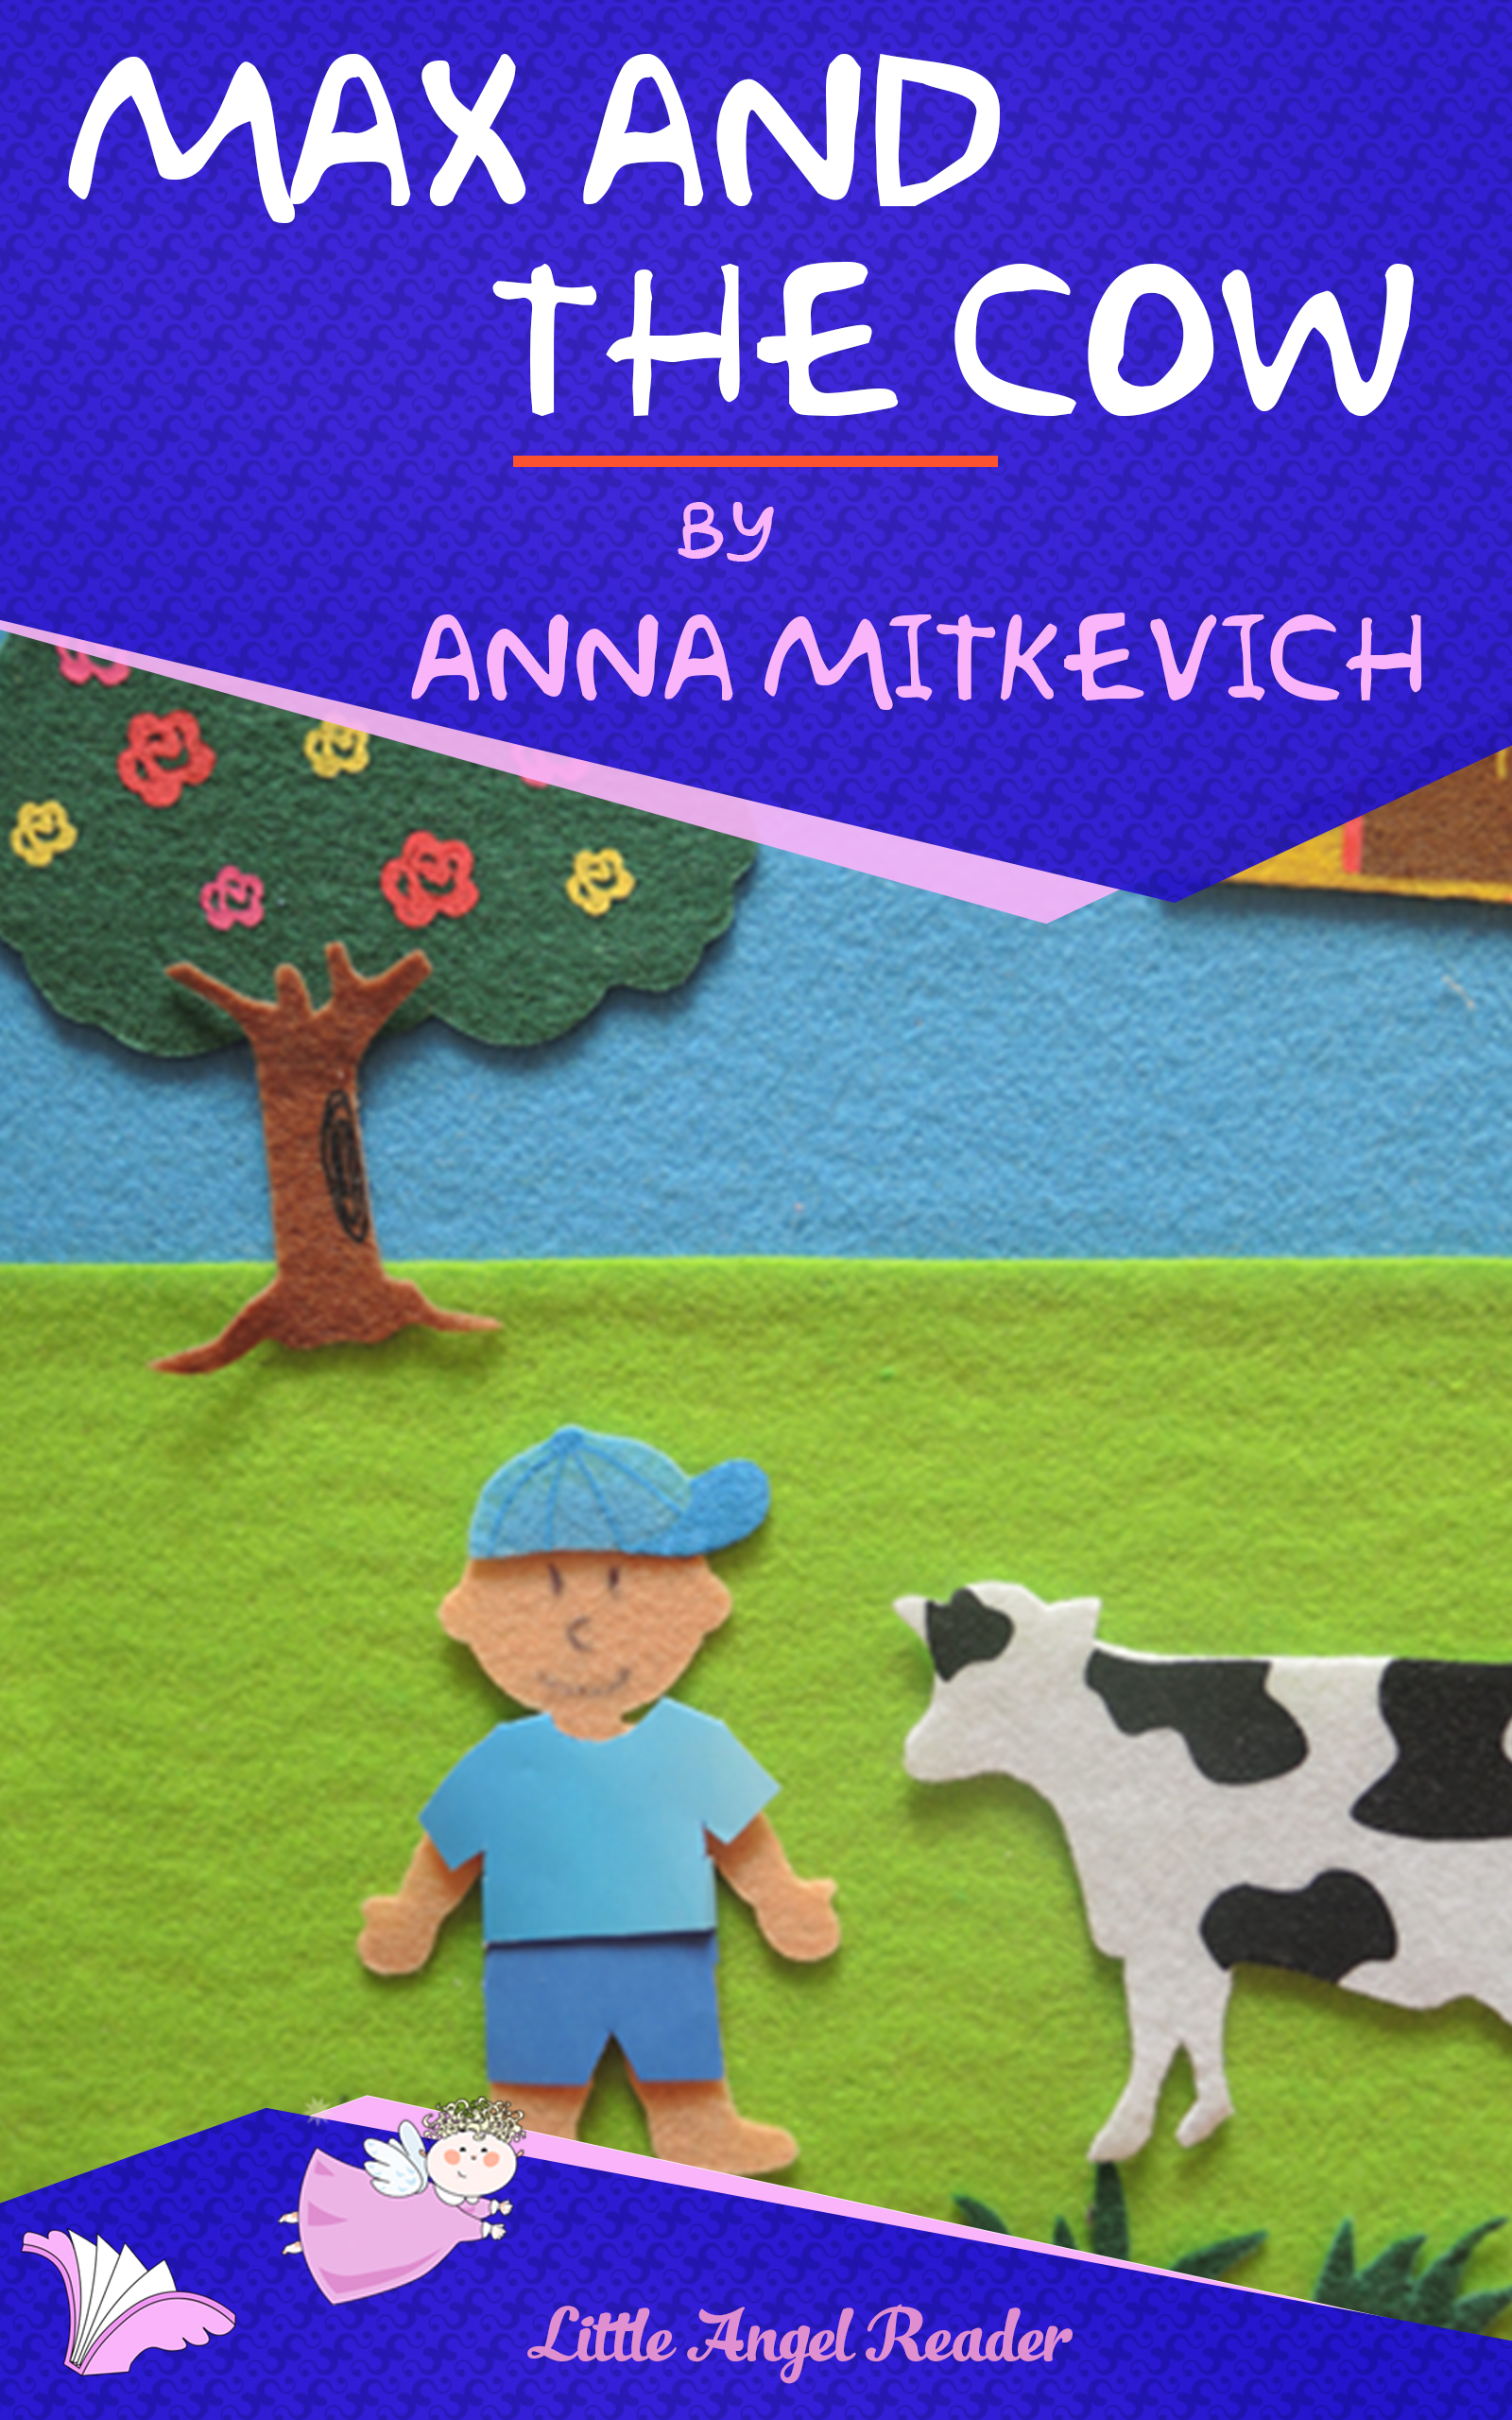 FREE: Max and the Cow by Anna Mitkevich